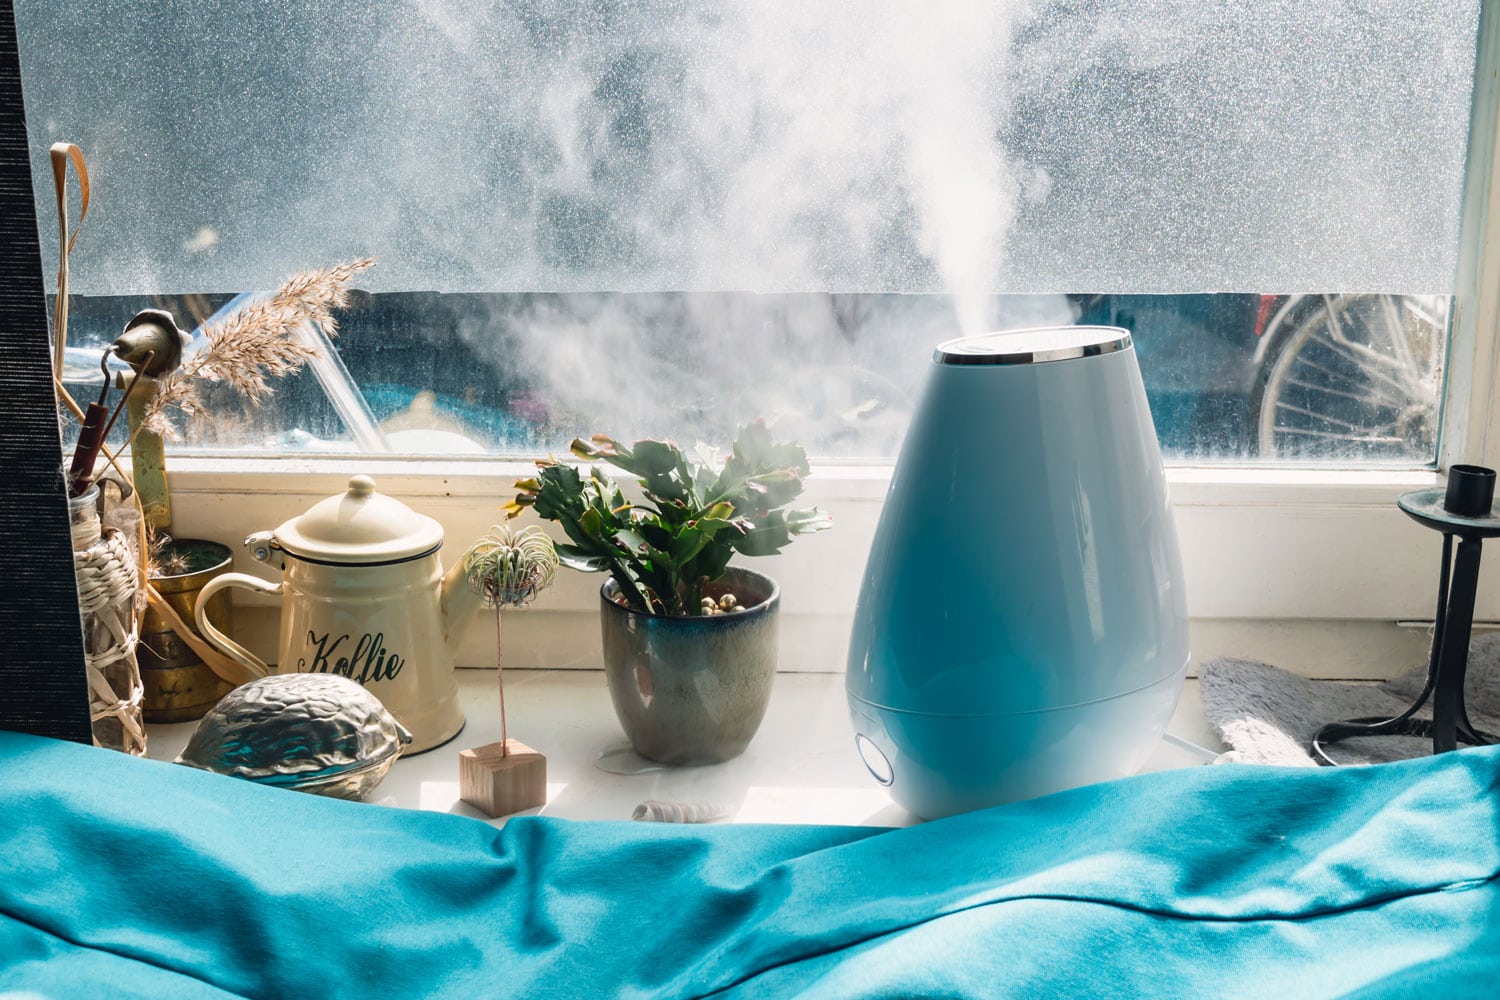 A blue humidifier placed near the window